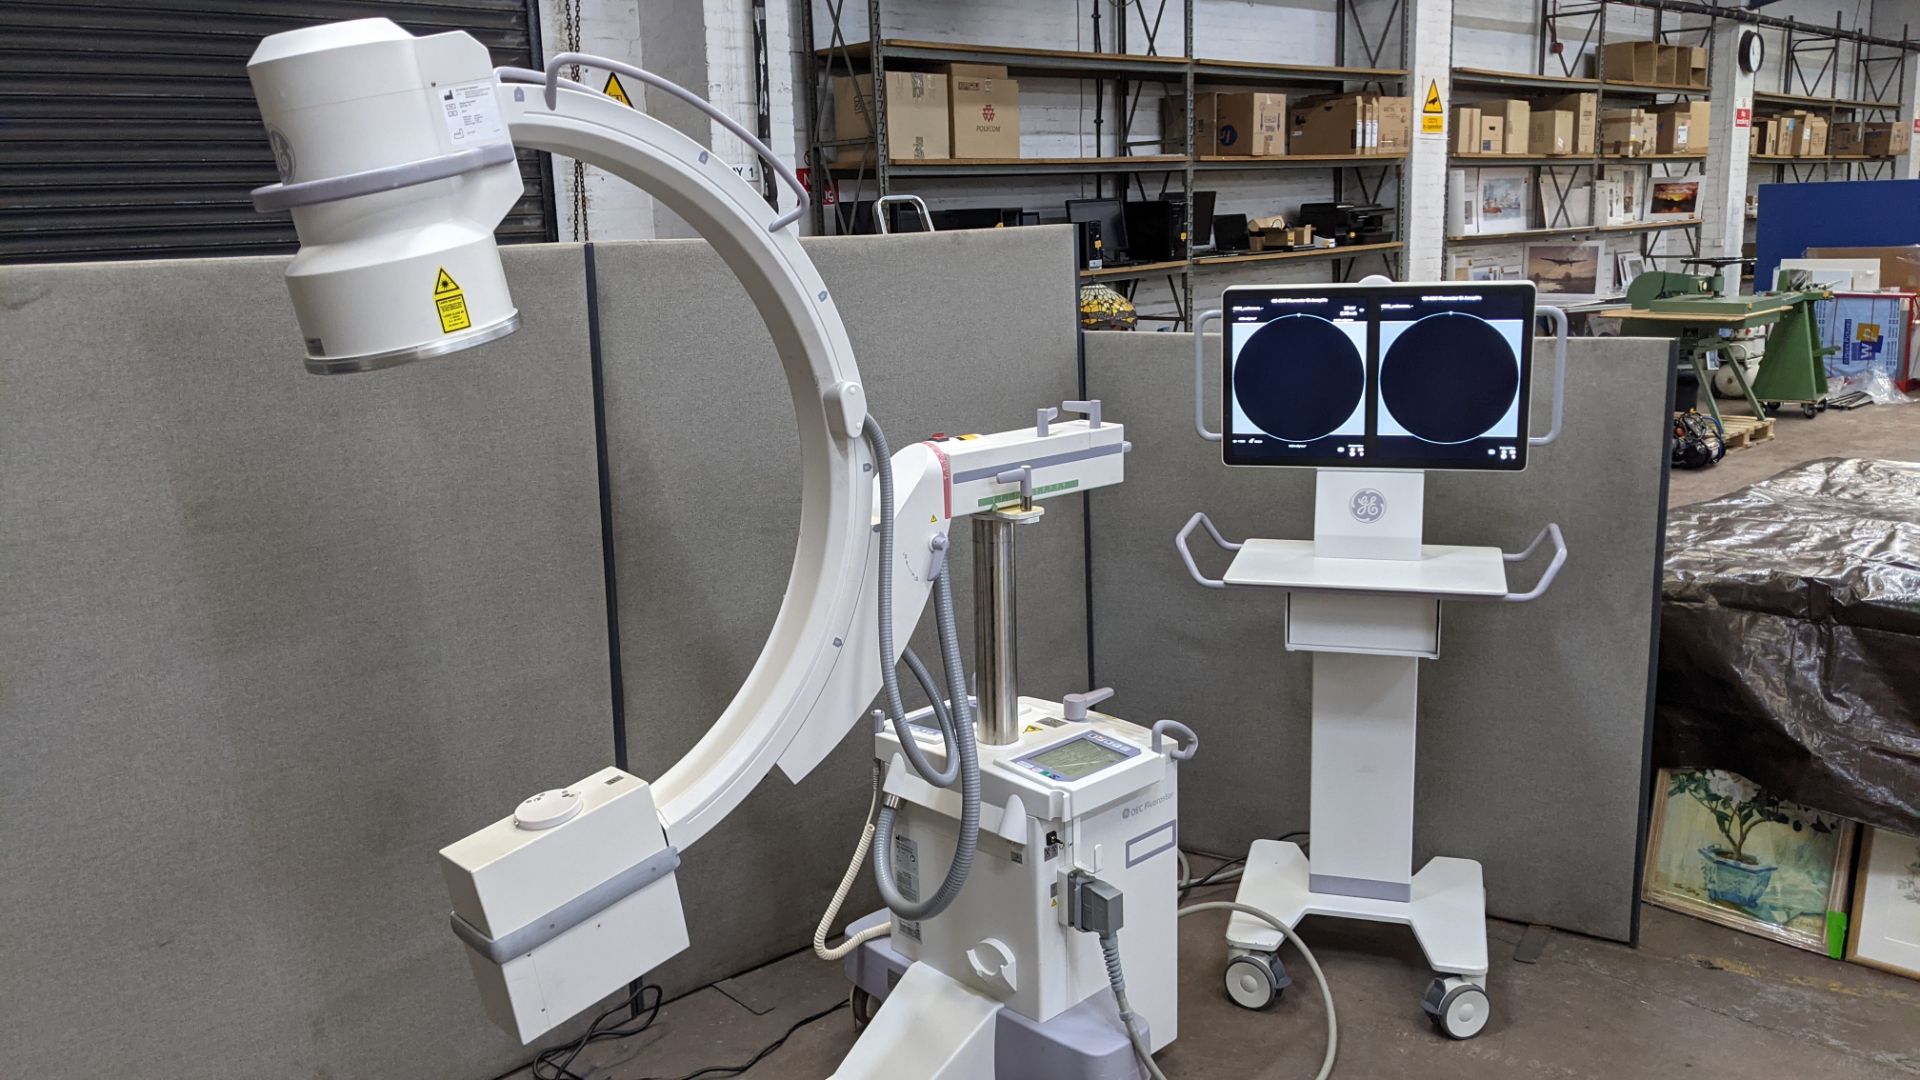 GE-OEC Fluorostar imaging system, purchased new in August 2017. EO4 Series. - Image 60 of 68